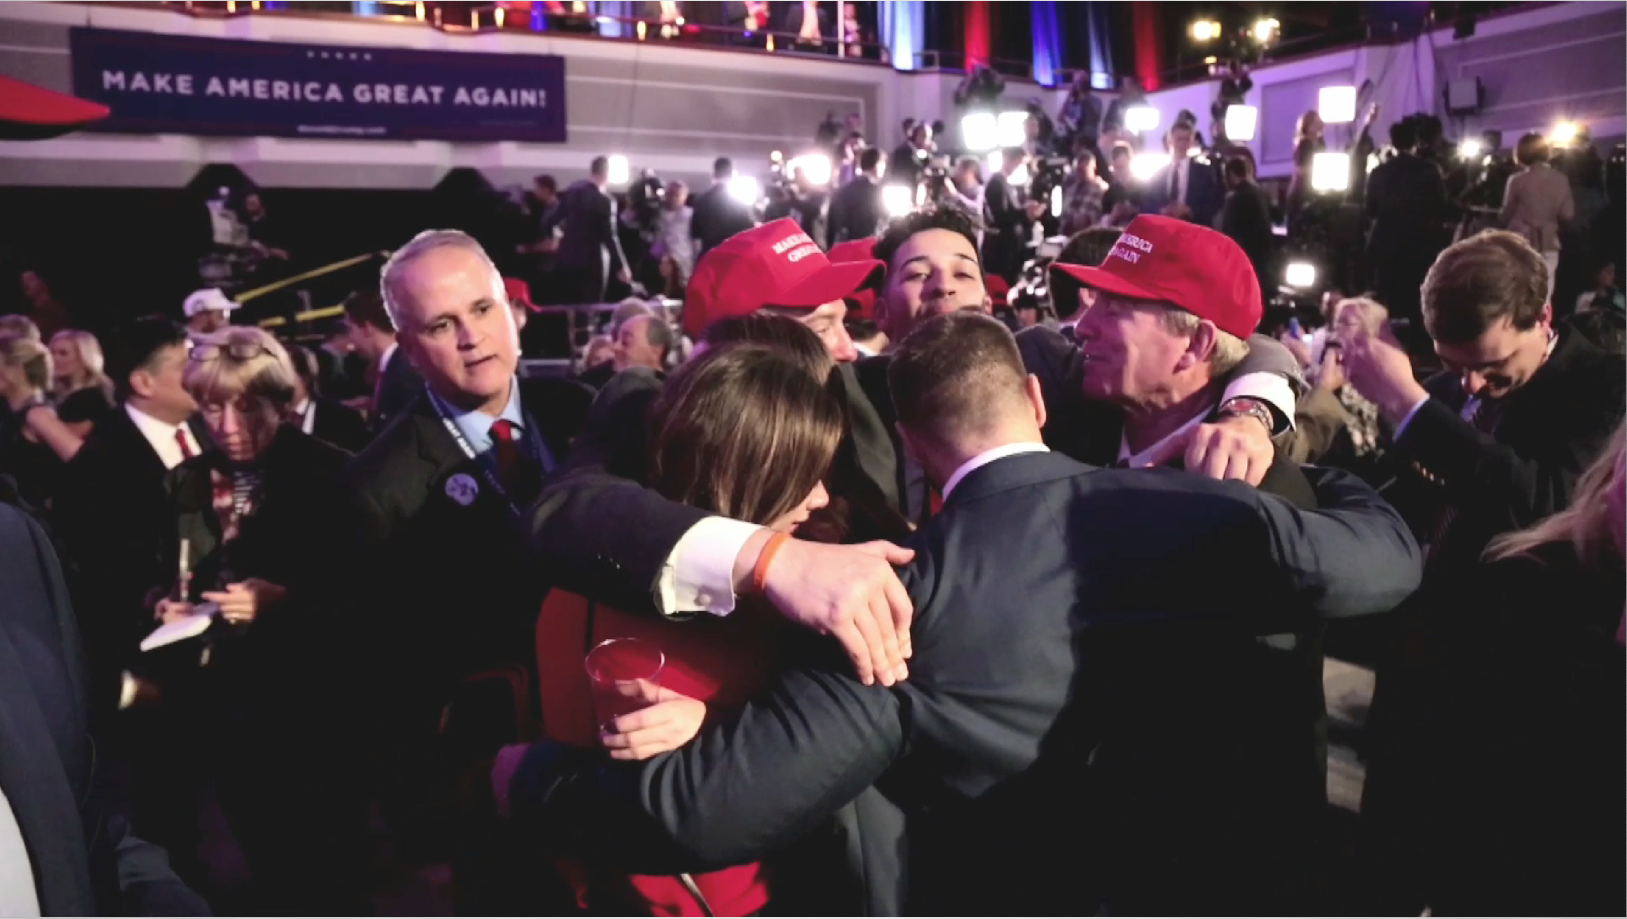 Members of a group, some wearing "Make America Great Again" hats, hug each other